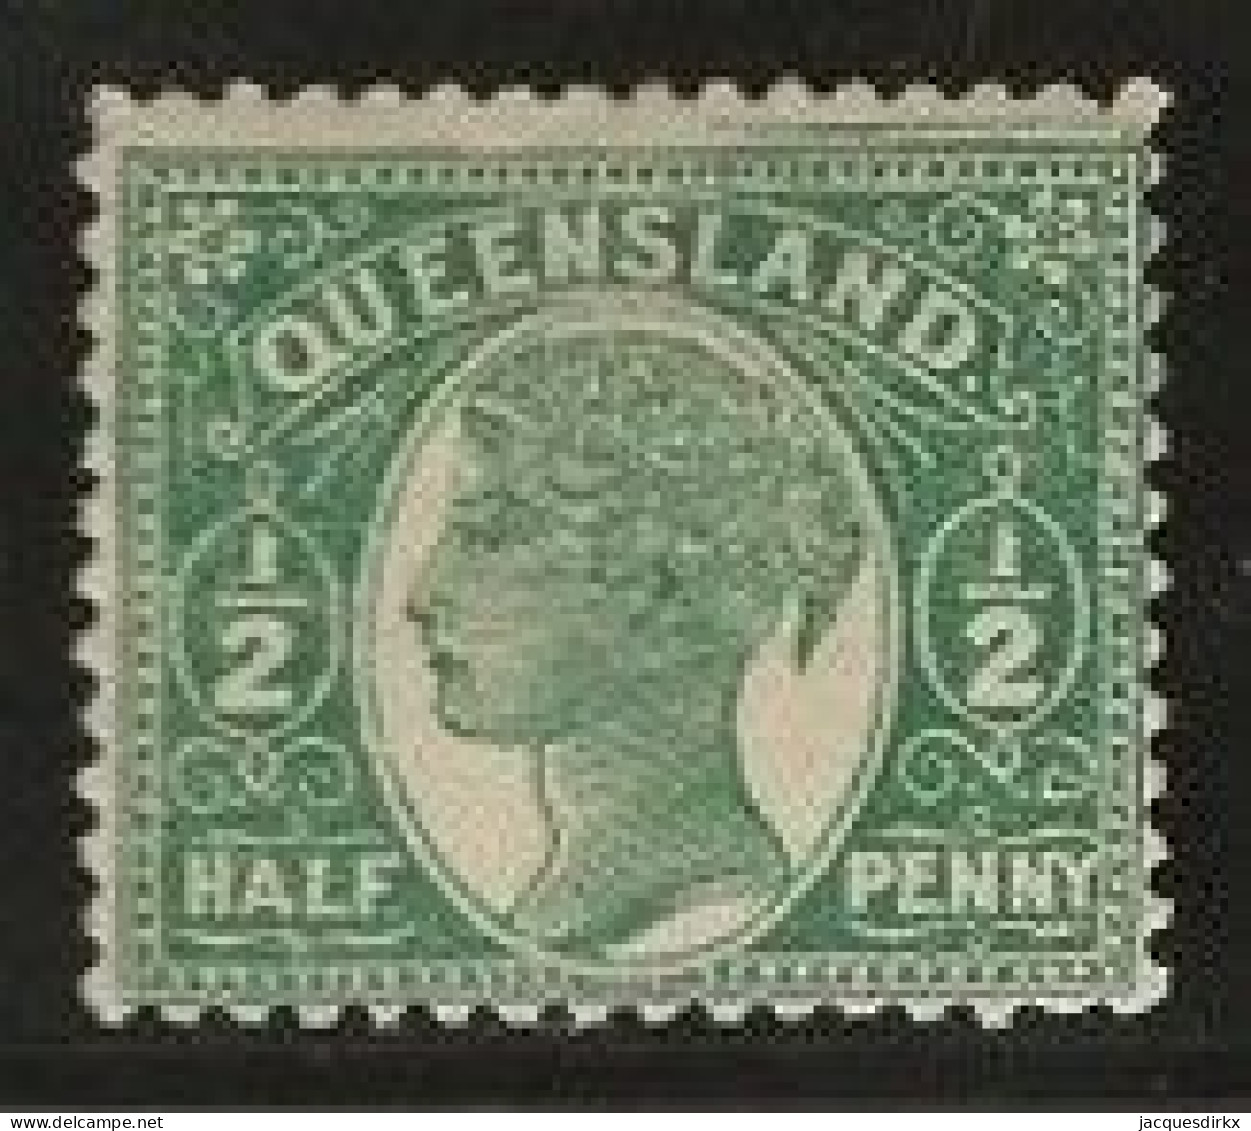 Queensland    .   SG    .   225       .  *    .    Mint-hinged - Mint Stamps